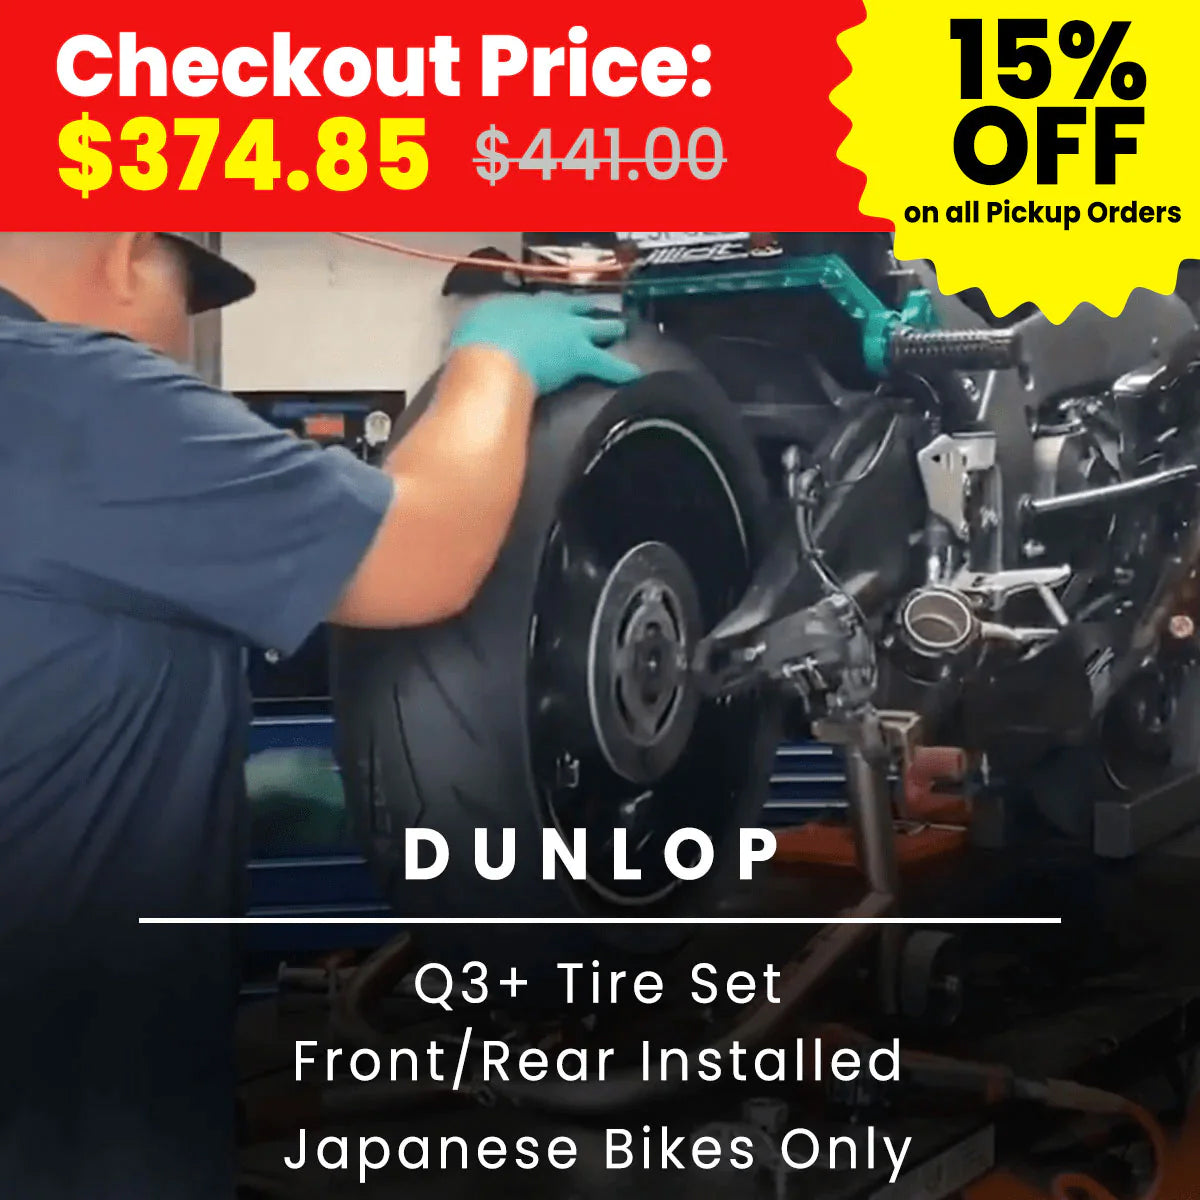 Motorcycle Sportbike Dunlop Q3+ Front/Rear Tire Set Installed For Japanese Bikes Only (At Location: Fullerton CA)
